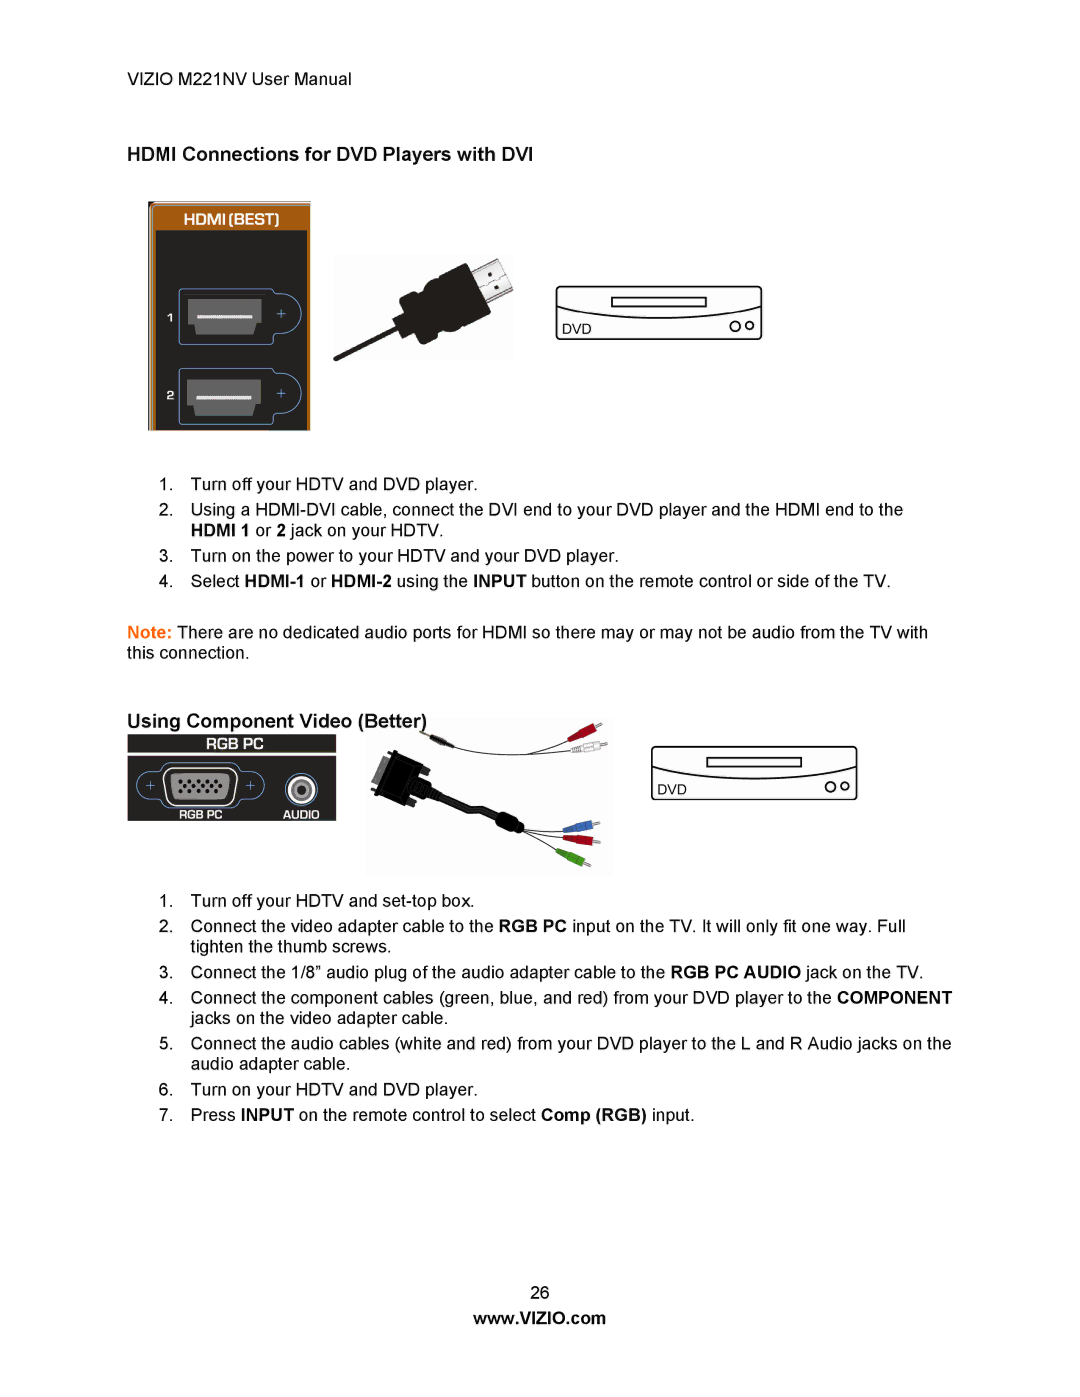 Vizio M221NV user manual Hdmi Connections for DVD Players with DVI, Using Component Video Better 